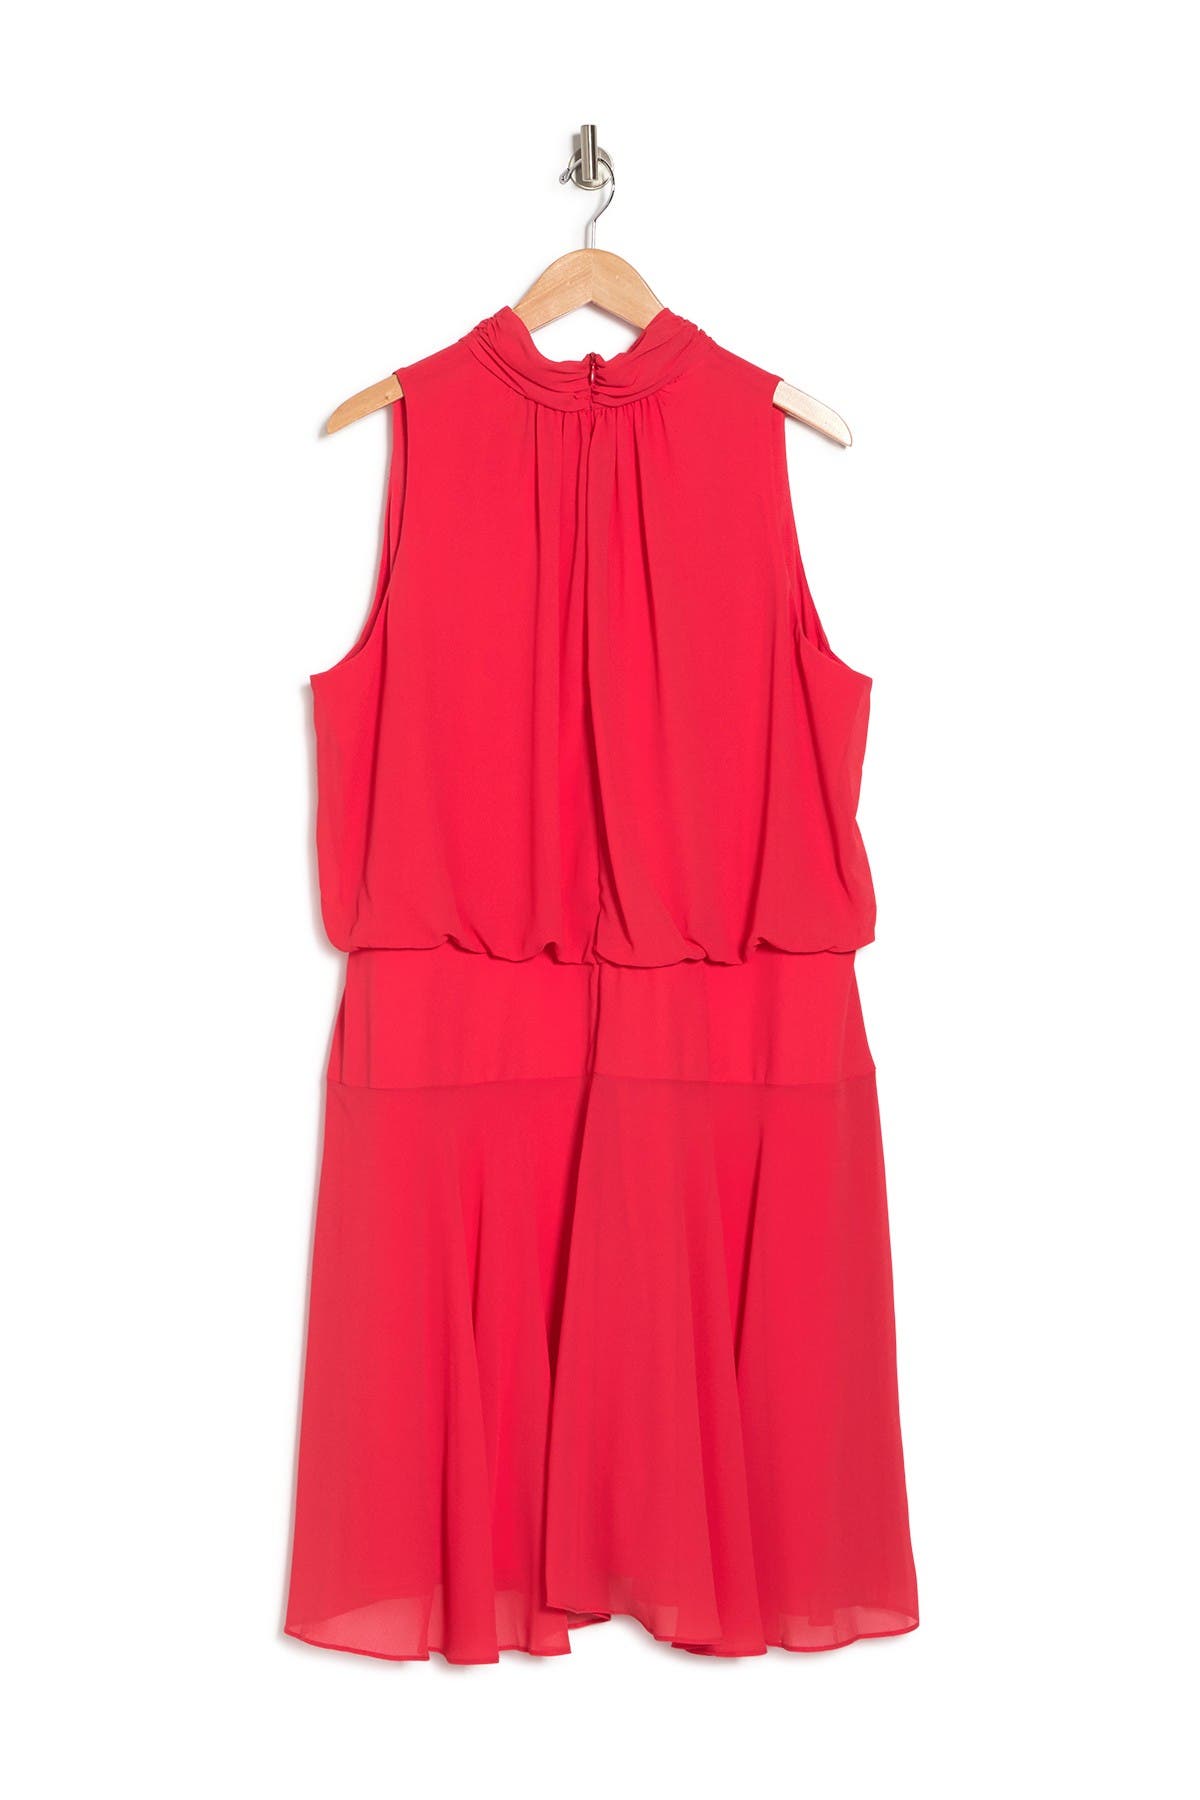 Taylor Mock Neck Sleeveless Dress In Coral